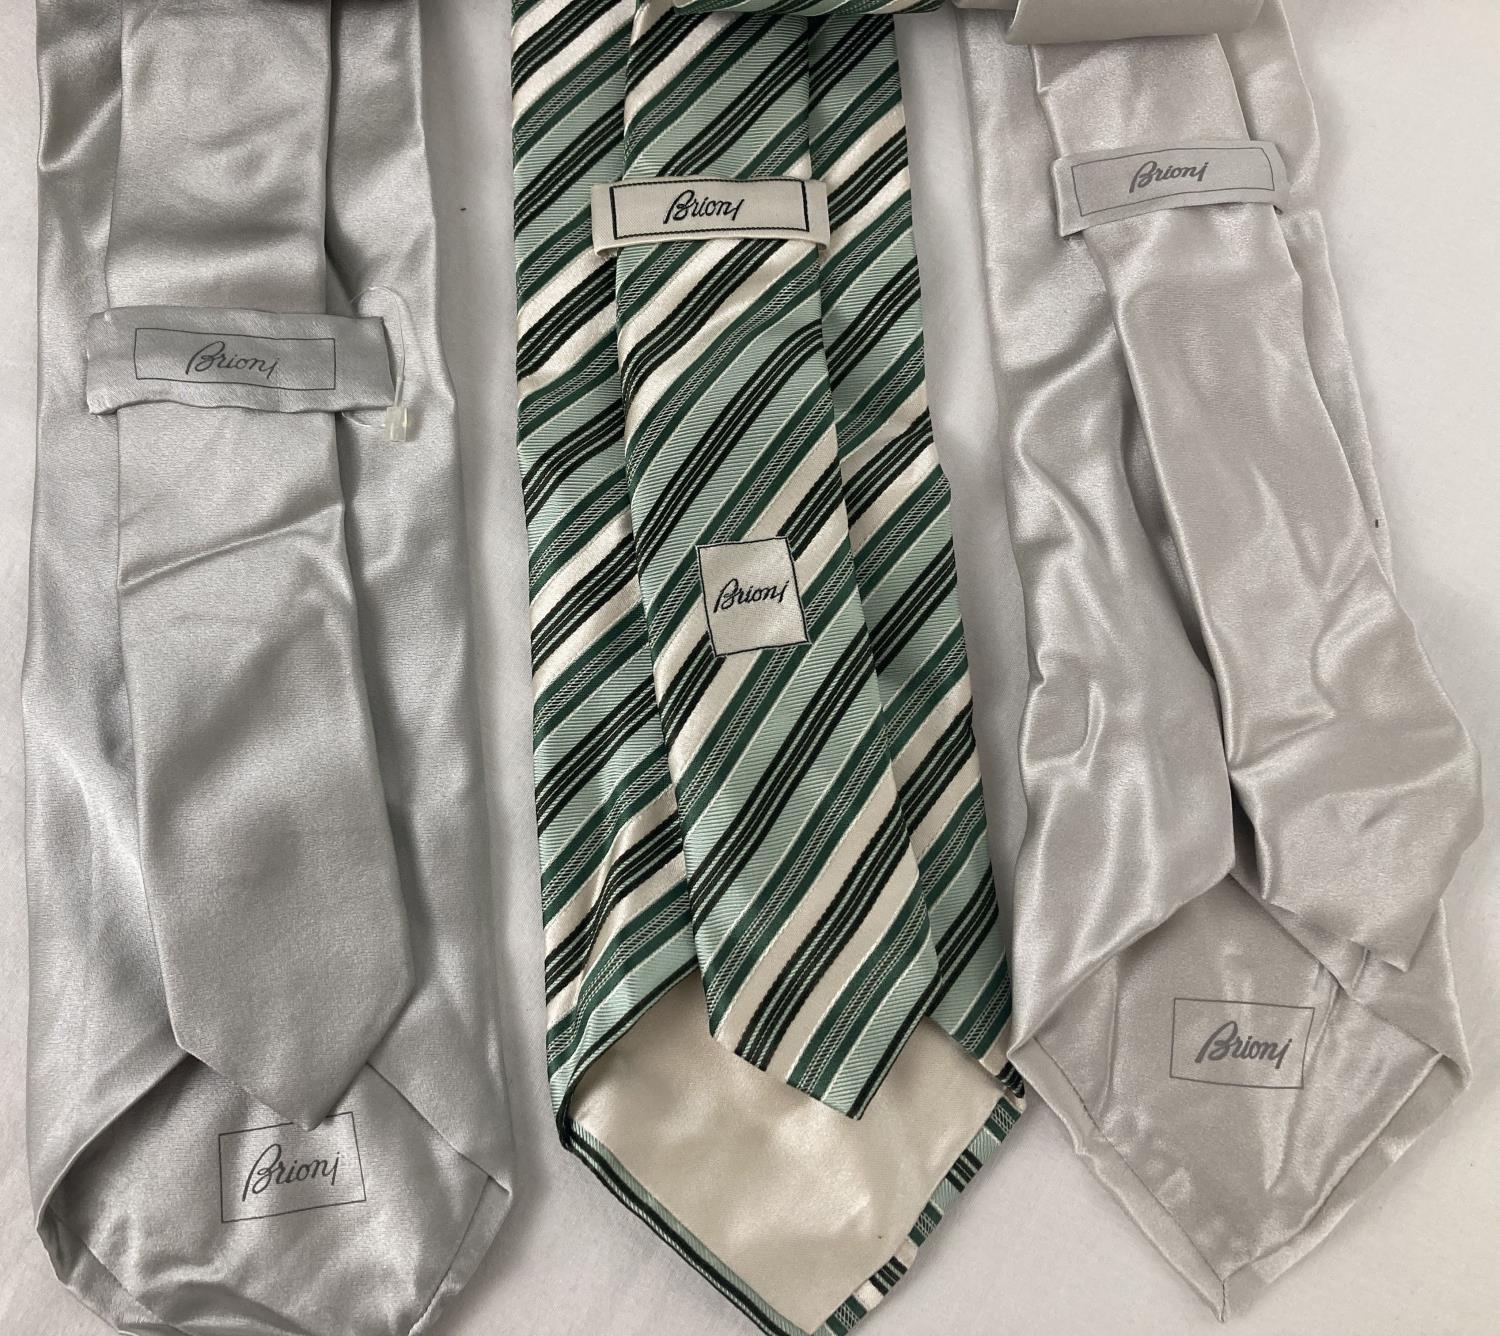 3 vintage Brioni men's silk ties. 2 in plain natural colours and a striped green tie. - Image 2 of 2